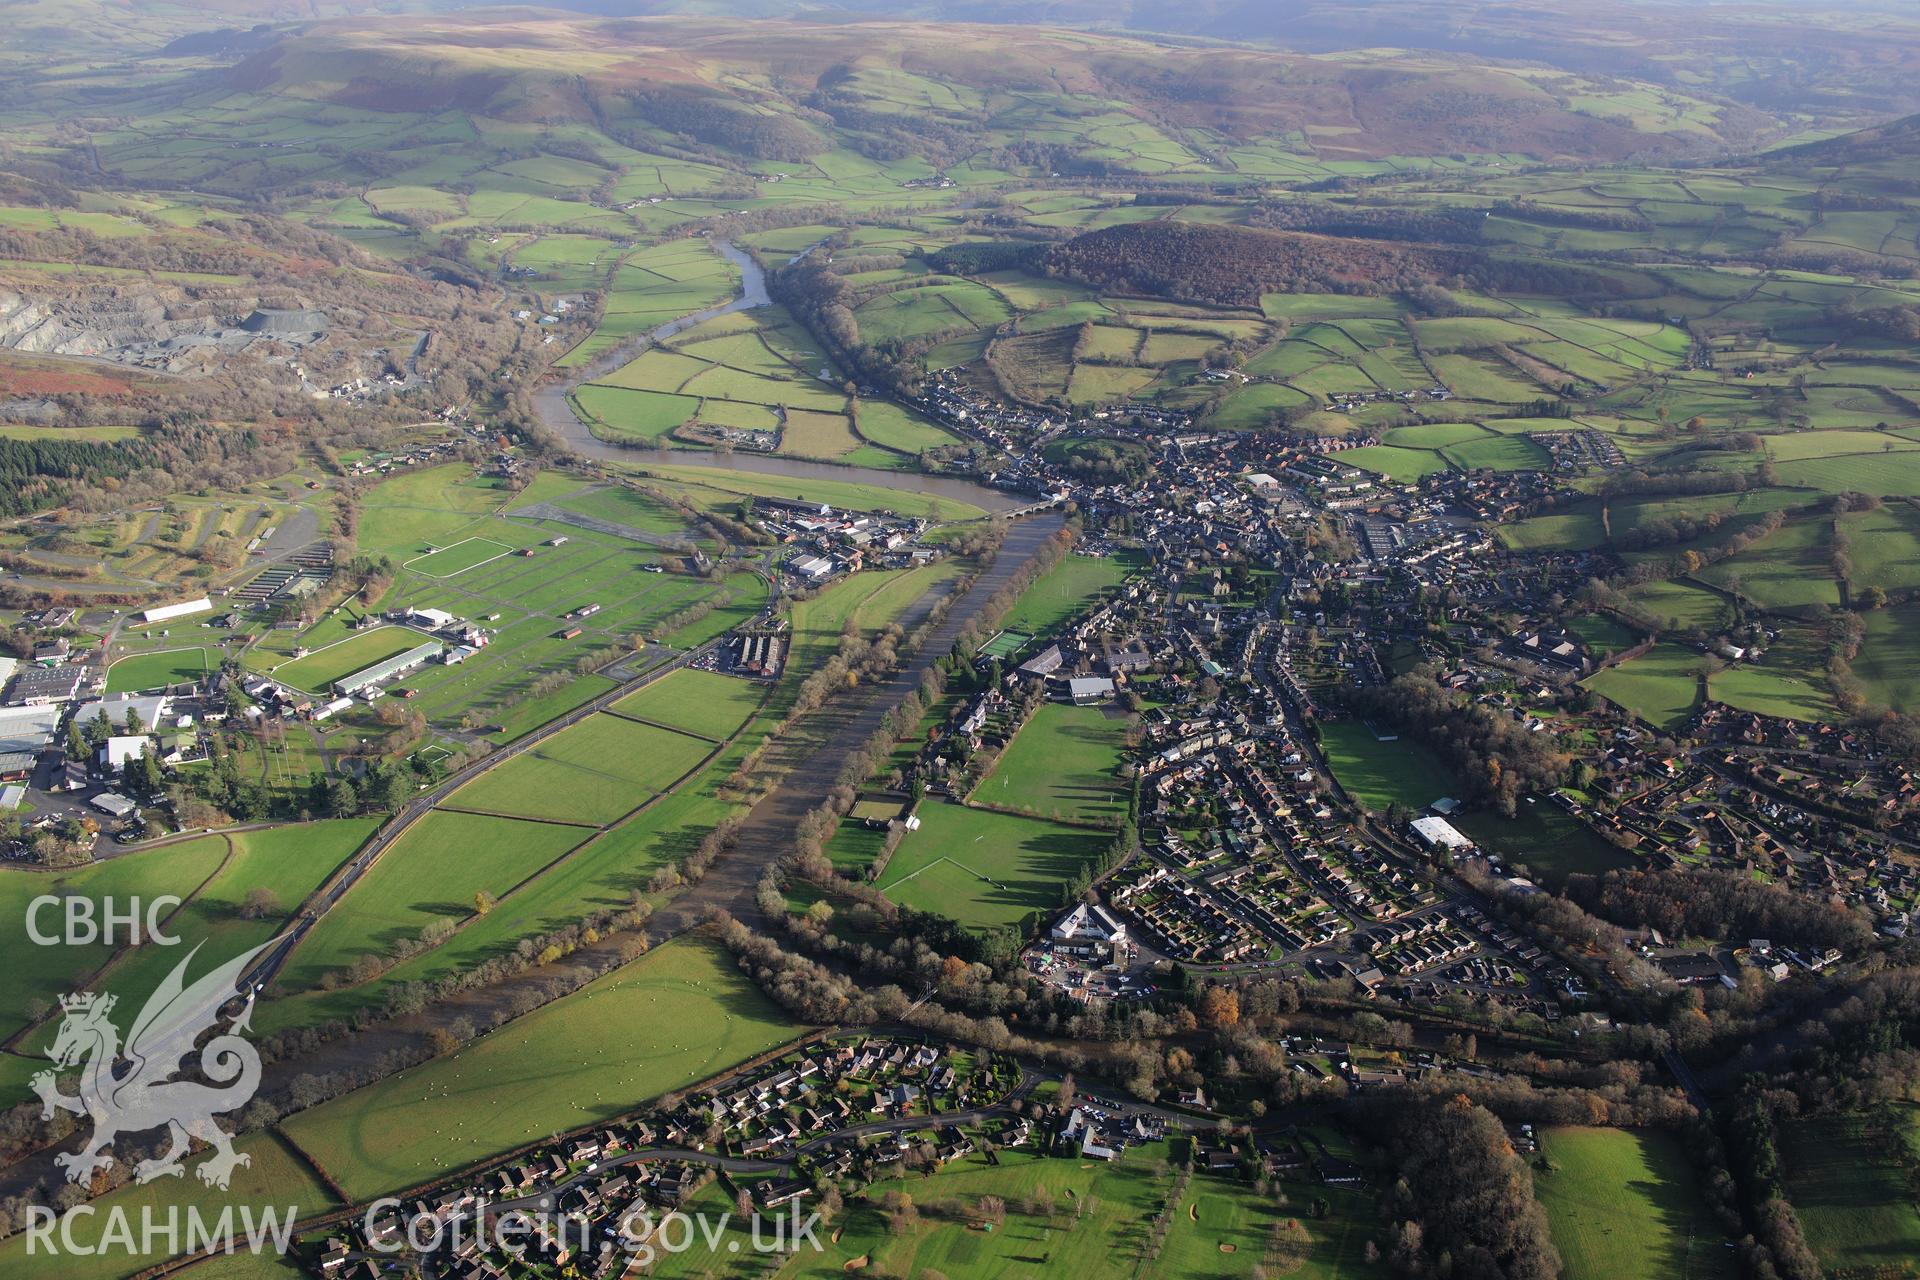 RCAHMW colour oblique photograph of Builth Wells, from west. Taken by Toby Driver on 23/11/2012.